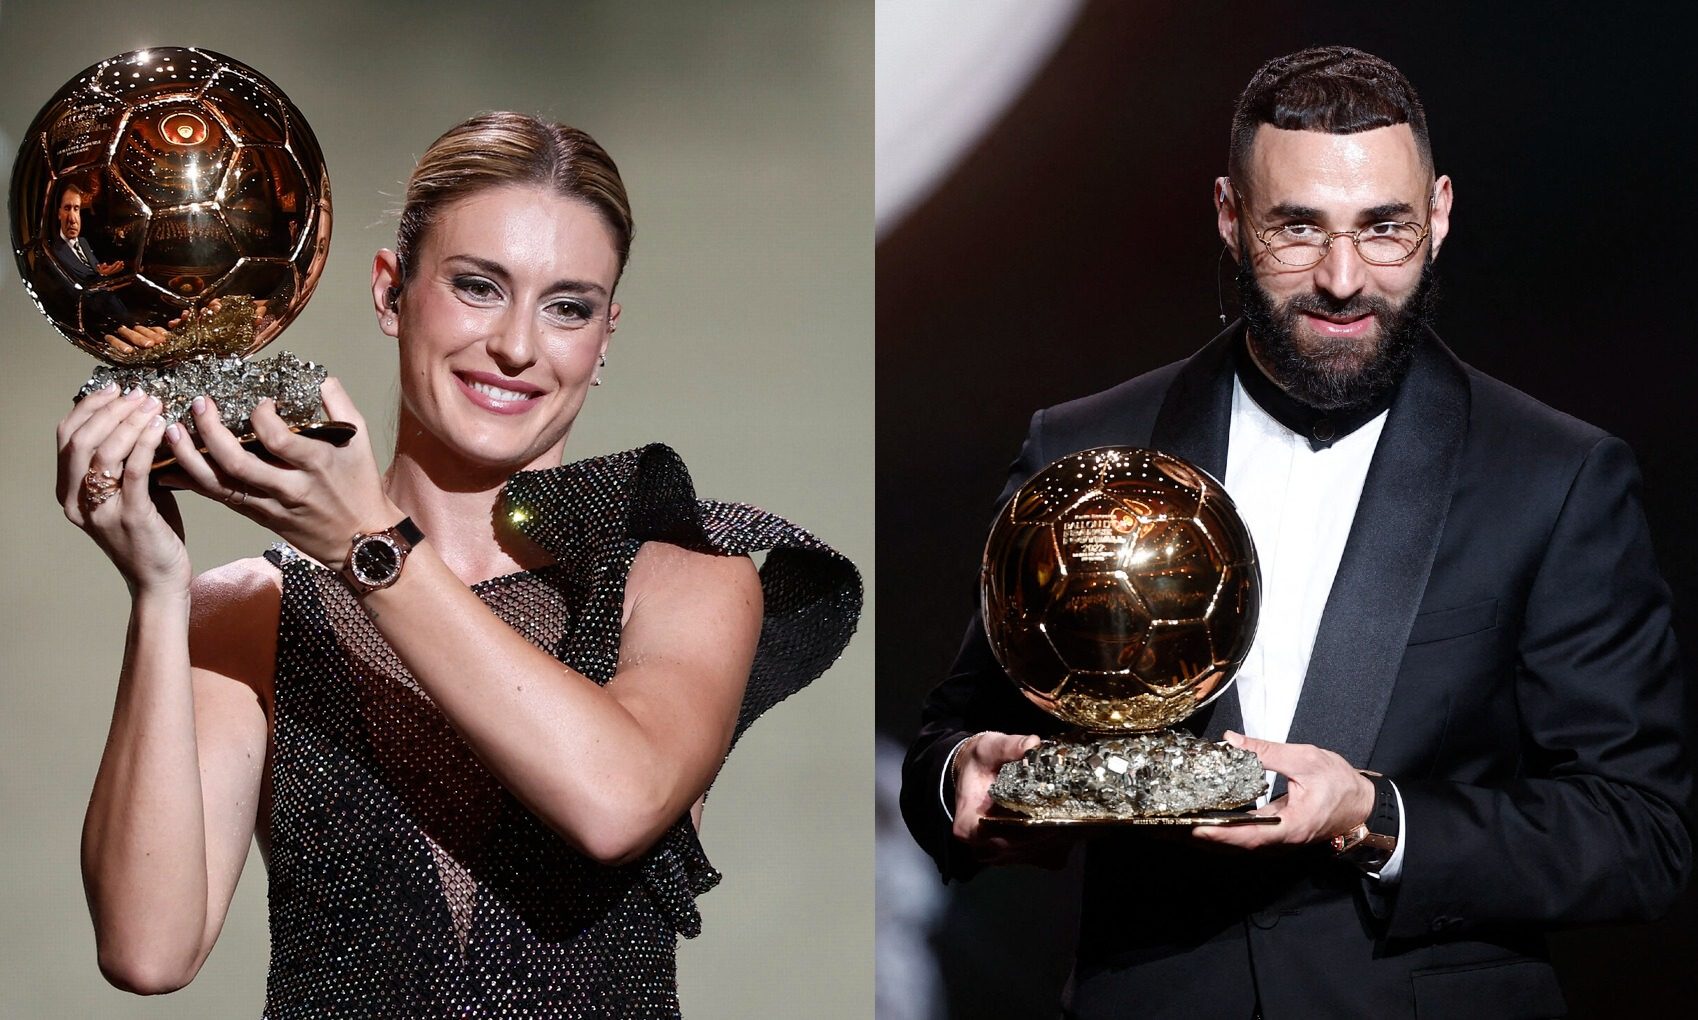 Benzema, Putellas win Ballon d’Or awards for best players in the world